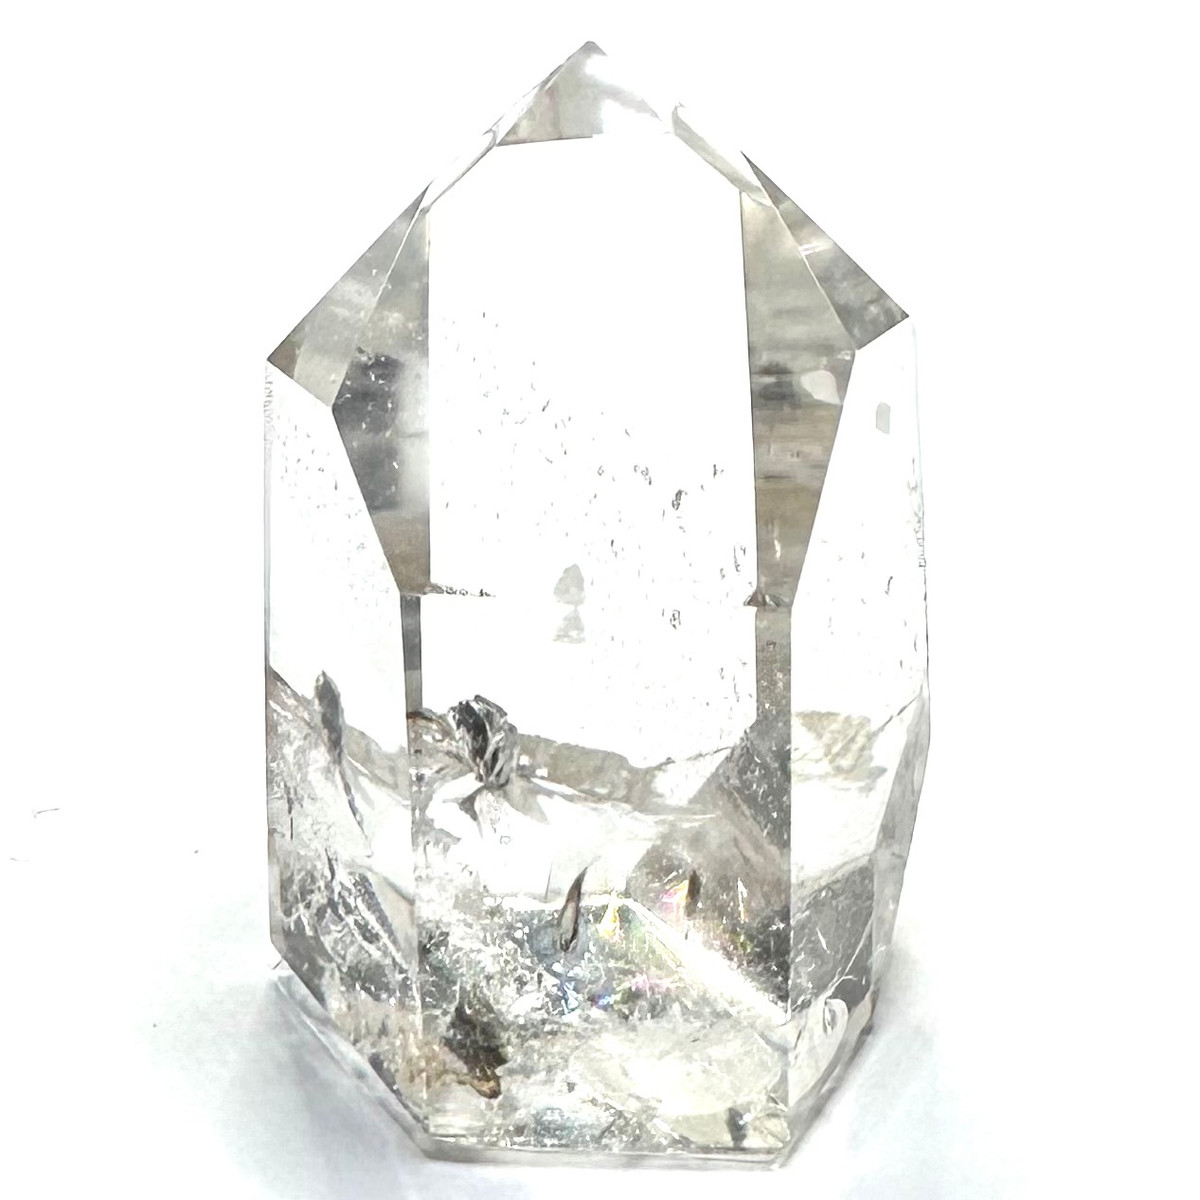 One of a Kind Manifestation Quartz Crystal with Rainbow Inclusions Tower Stone-1 3/4 x 1 1/4"